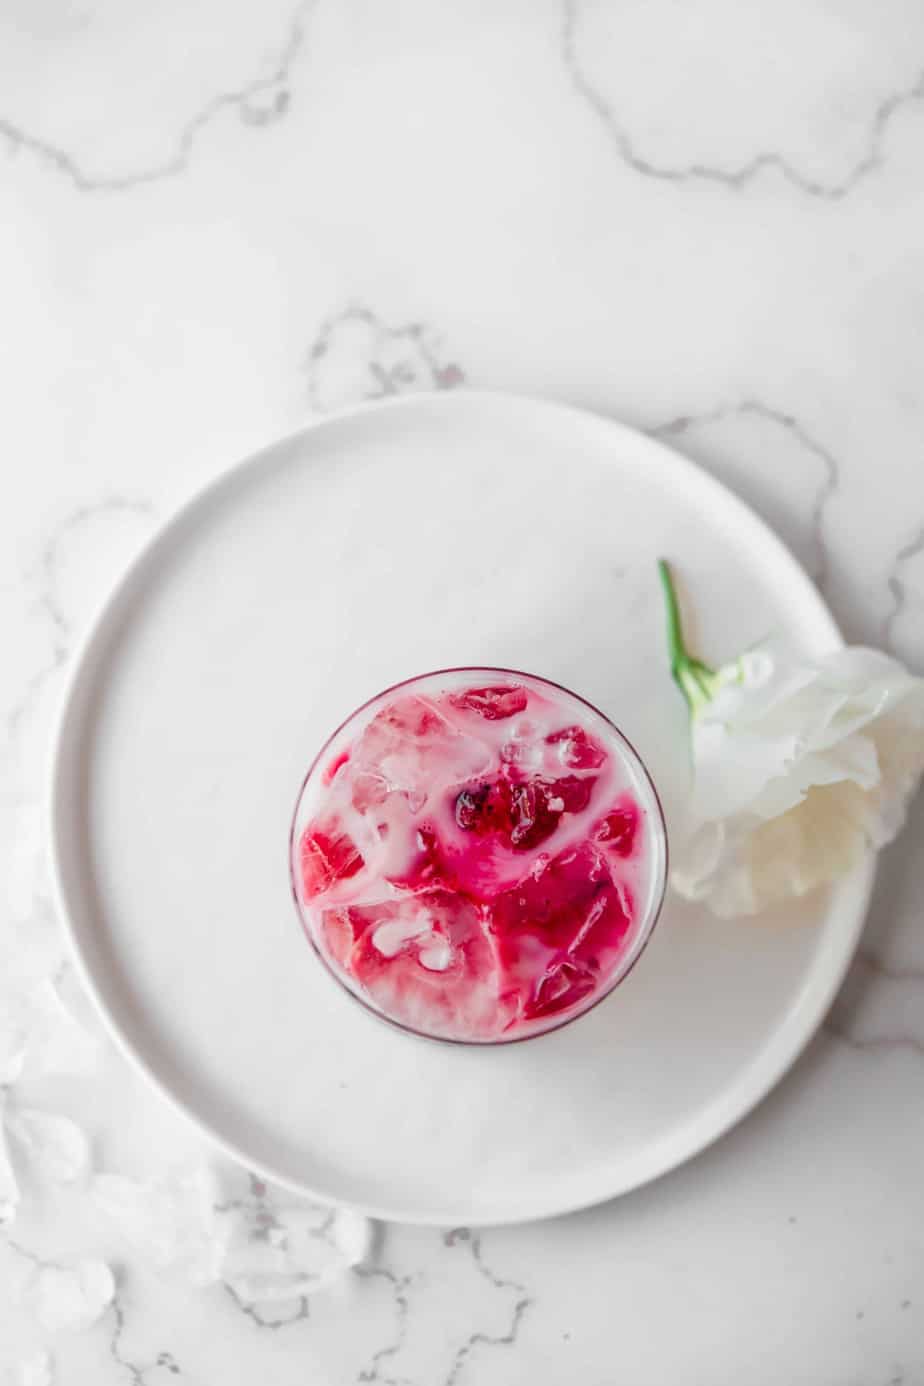 Homemade Iced Beetroot Latte with Coconut Milk in a glass on a plate.